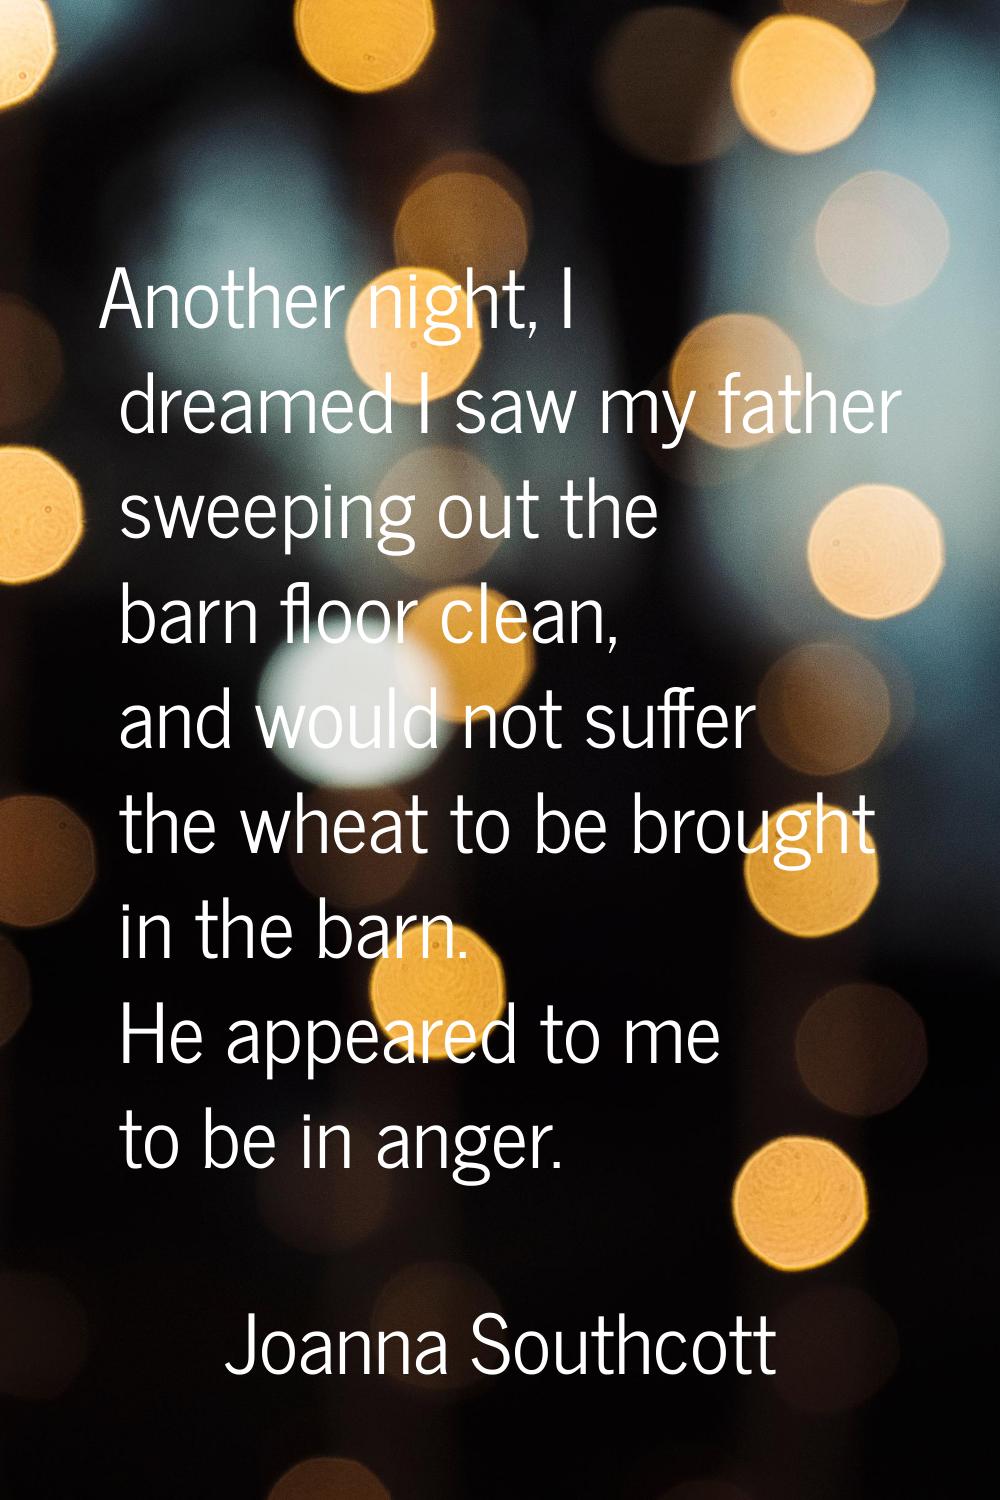 Another night, I dreamed I saw my father sweeping out the barn floor clean, and would not suffer th